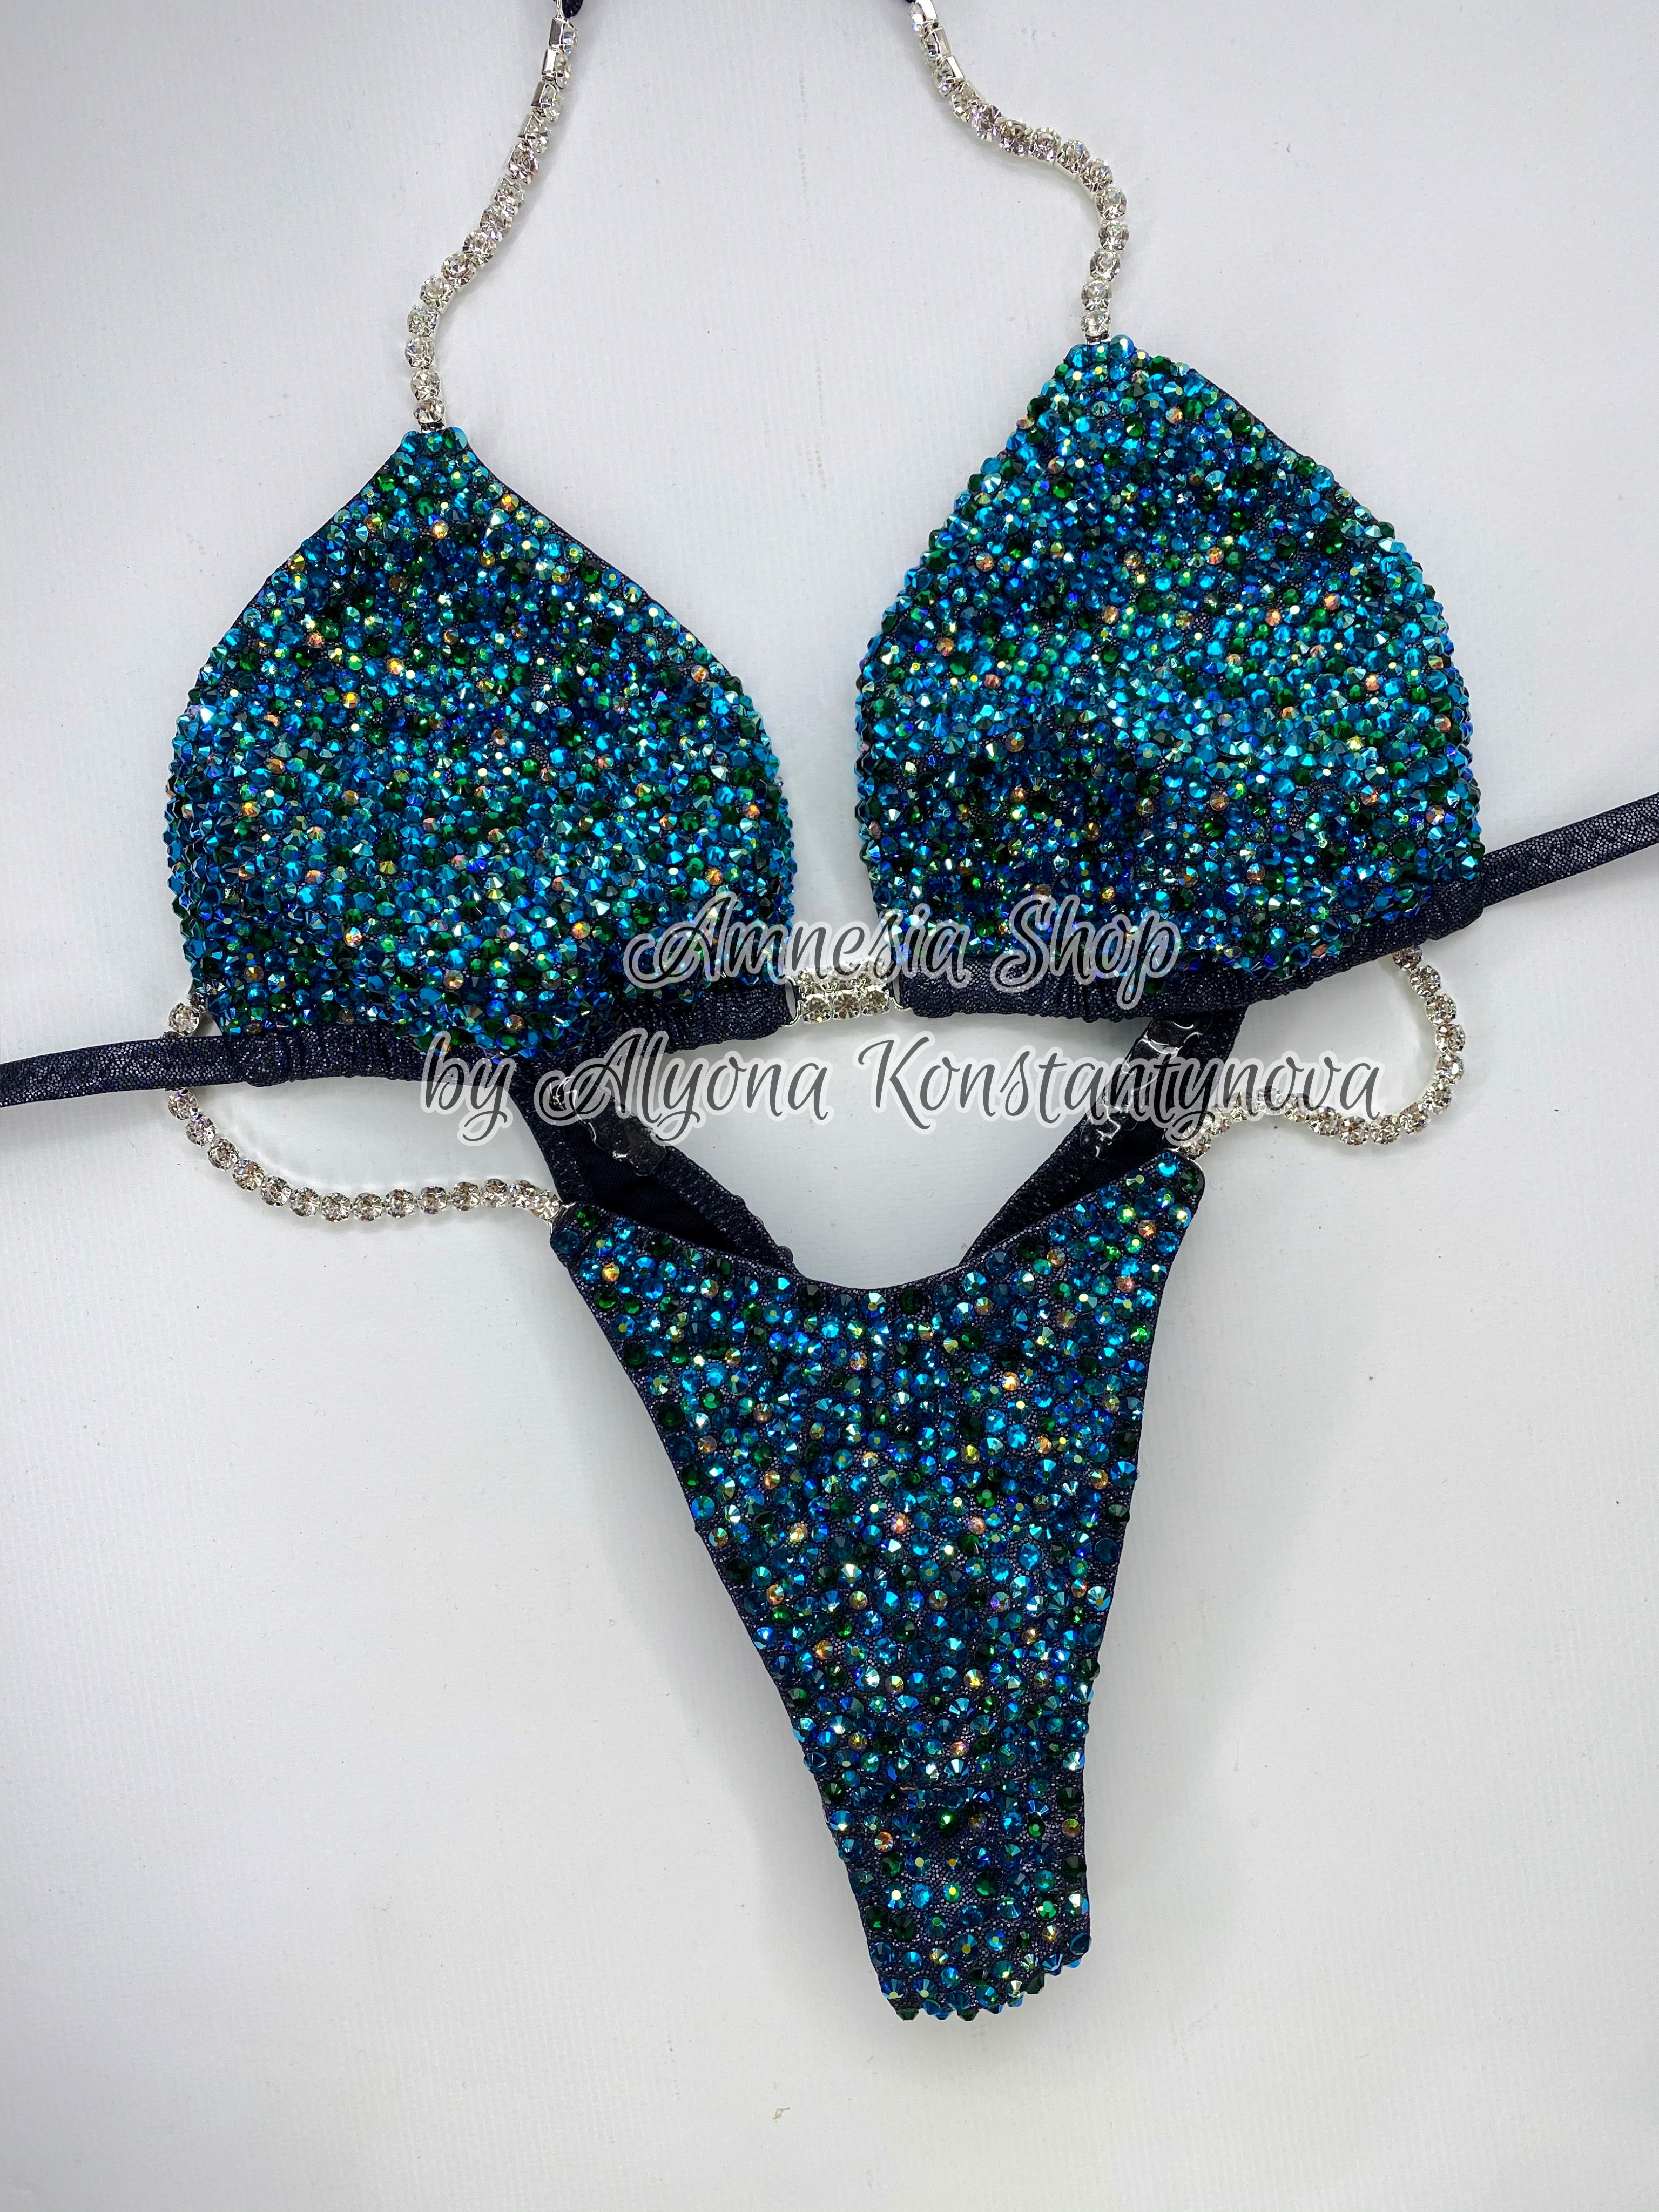 Custom Made Competition Stage Bikinis - Figure Suits and Physique